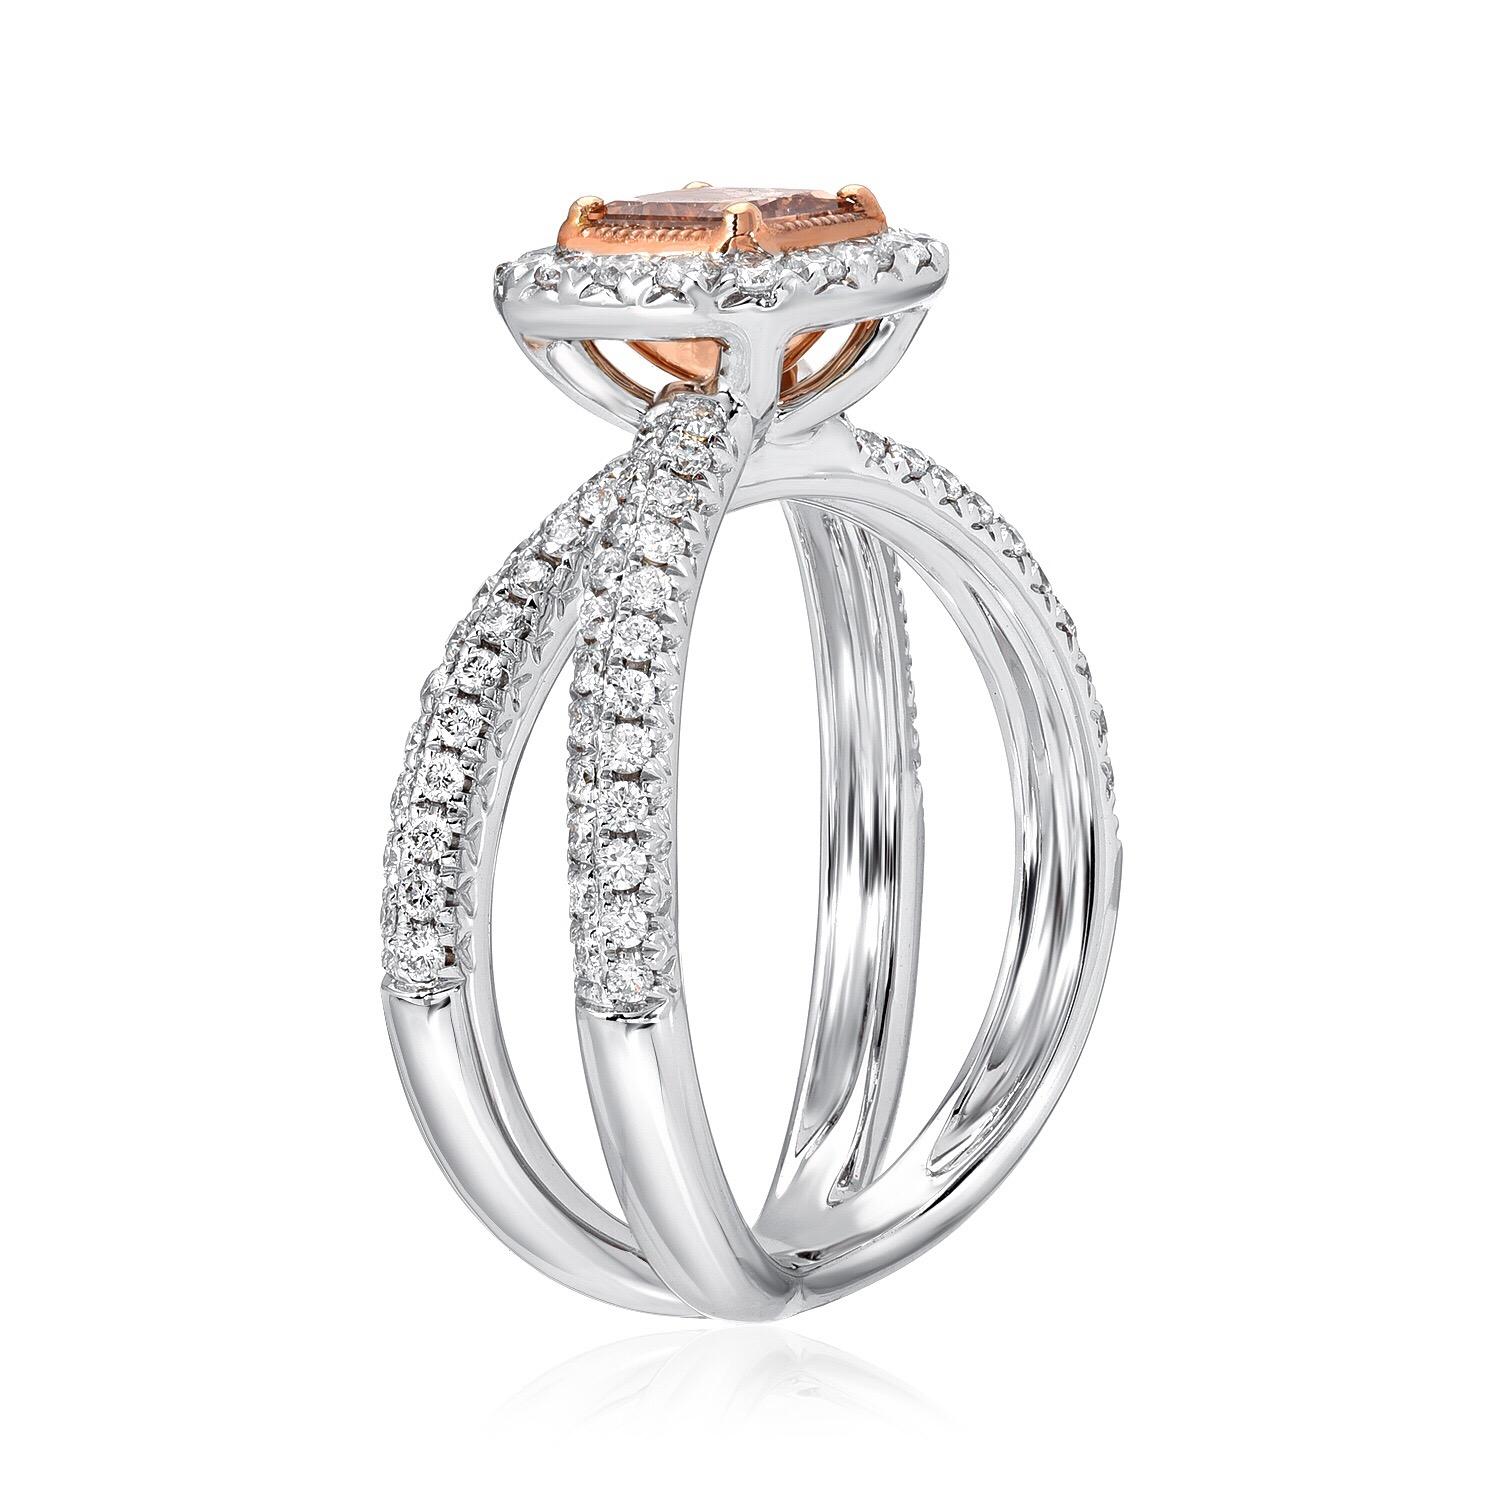 Fancy Orange Brown diamond ring, featuring a G.I.A certified 0.58 carat princess cut diamond, set in a criss cross round brilliant diamond setting weighing a total of 0.66 carats, to comprise this 18K white gold and rose gold ring.
The G.I.A